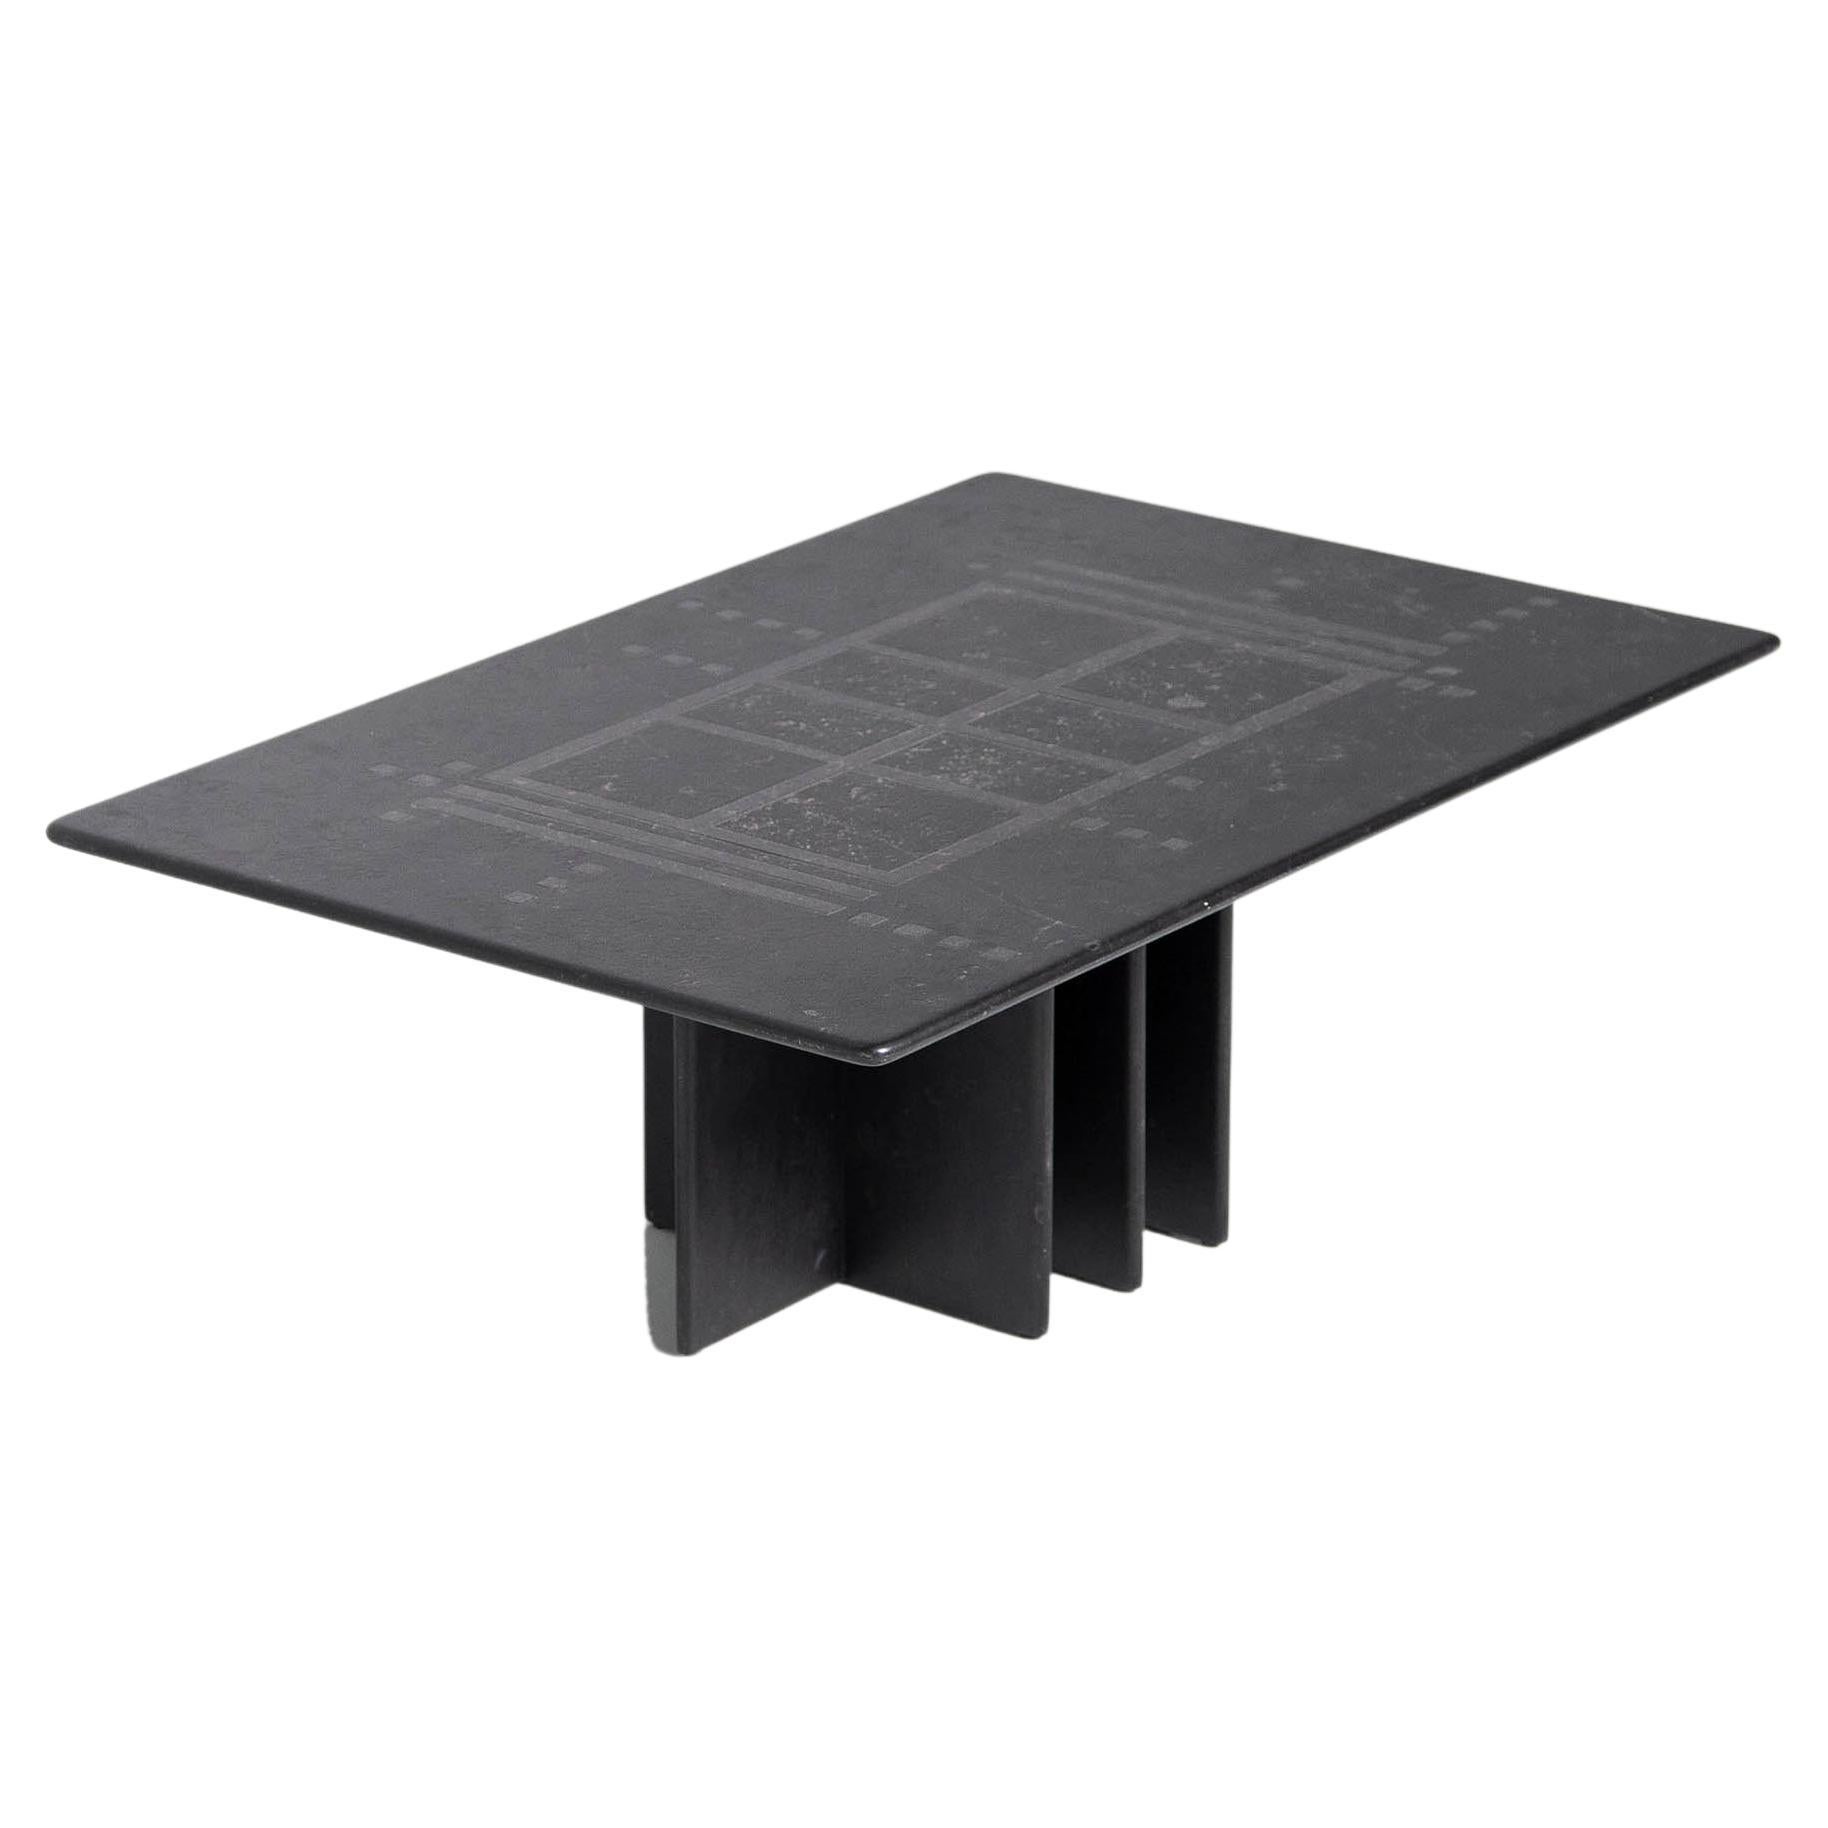 Heinz Lilienthal Slate Graphic Coffee Table Germany 1975